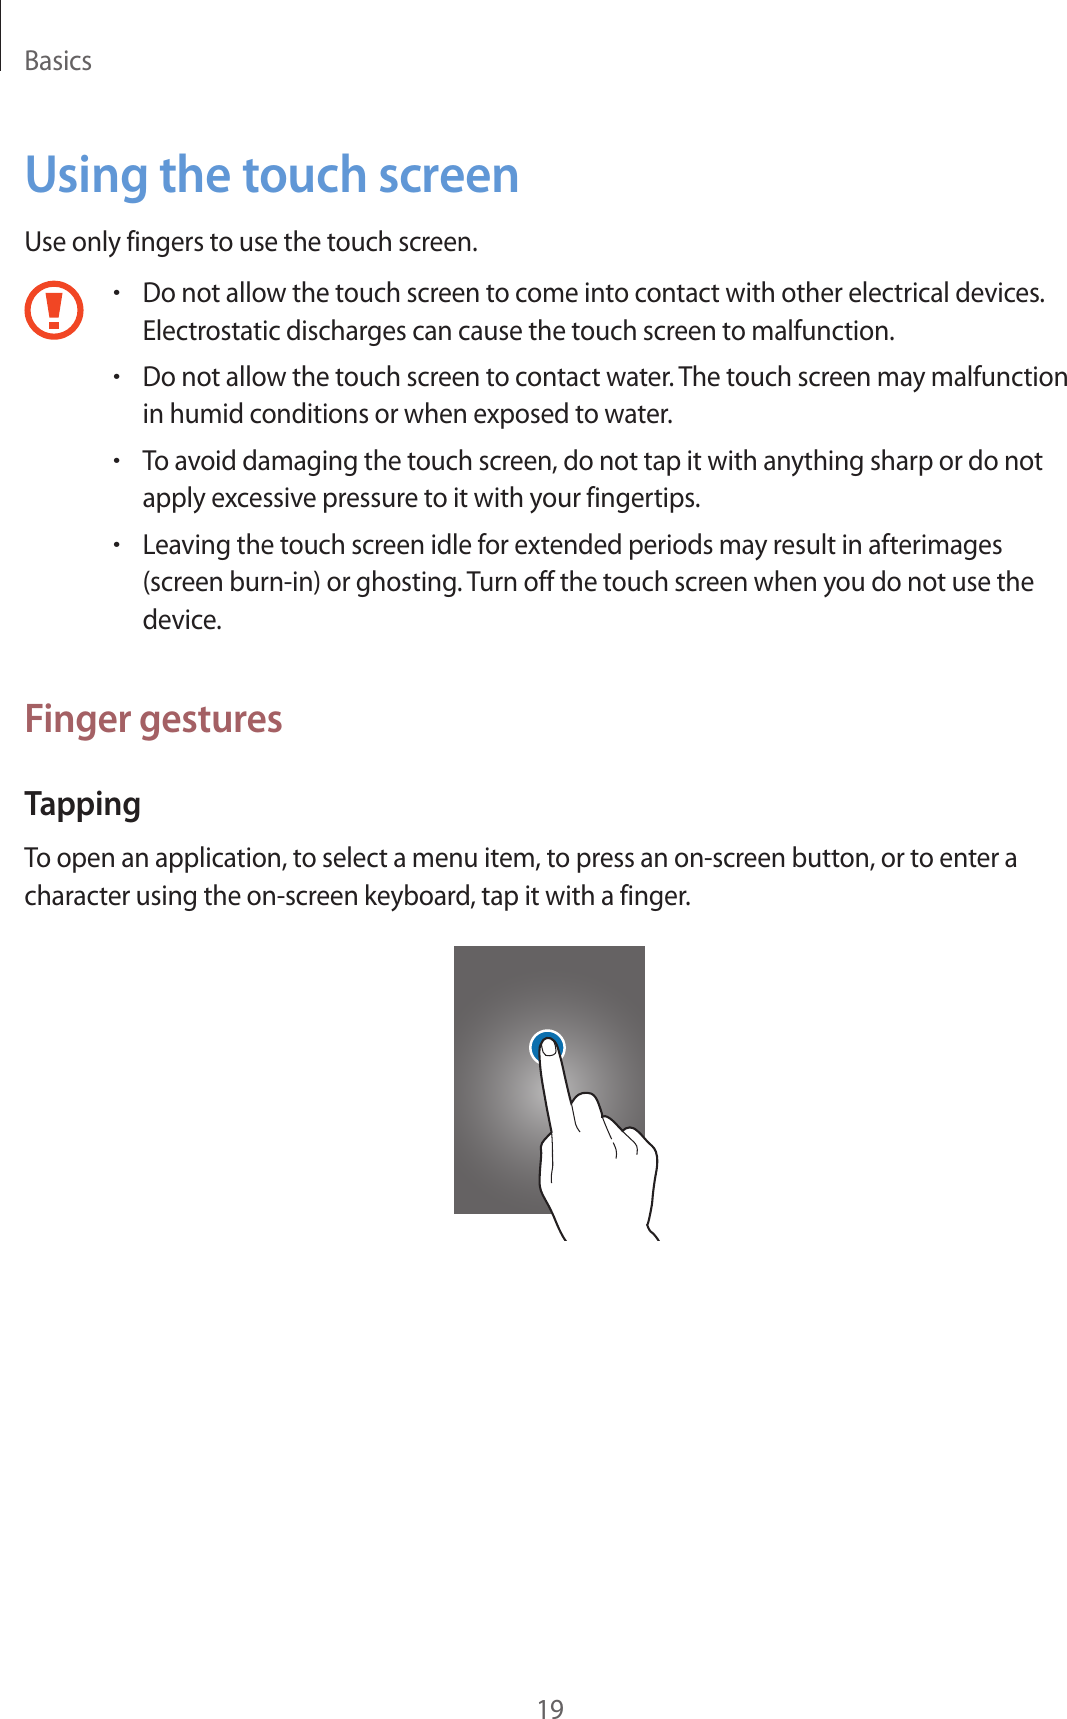 Basics19Using the touch screenUse only fingers to use the touch screen.• Do not allow the touch screen to come into contact with other electrical devices. Electrostatic discharges can cause the touch screen to malfunction.• Do not allow the touch screen to contact water. The touch screen may malfunction in humid conditions or when exposed to water.• To avoid damaging the touch screen, do not tap it with anything sharp or do not apply excessive pressure to it with your fingertips.• Leaving the touch screen idle for extended periods may result in afterimages (screen burn-in) or ghosting. Turn off the touch screen when you do not use the device.Finger gesturesTappingTo open an application, to select a menu item, to press an on-screen button, or to enter a character using the on-screen keyboard, tap it with a finger.